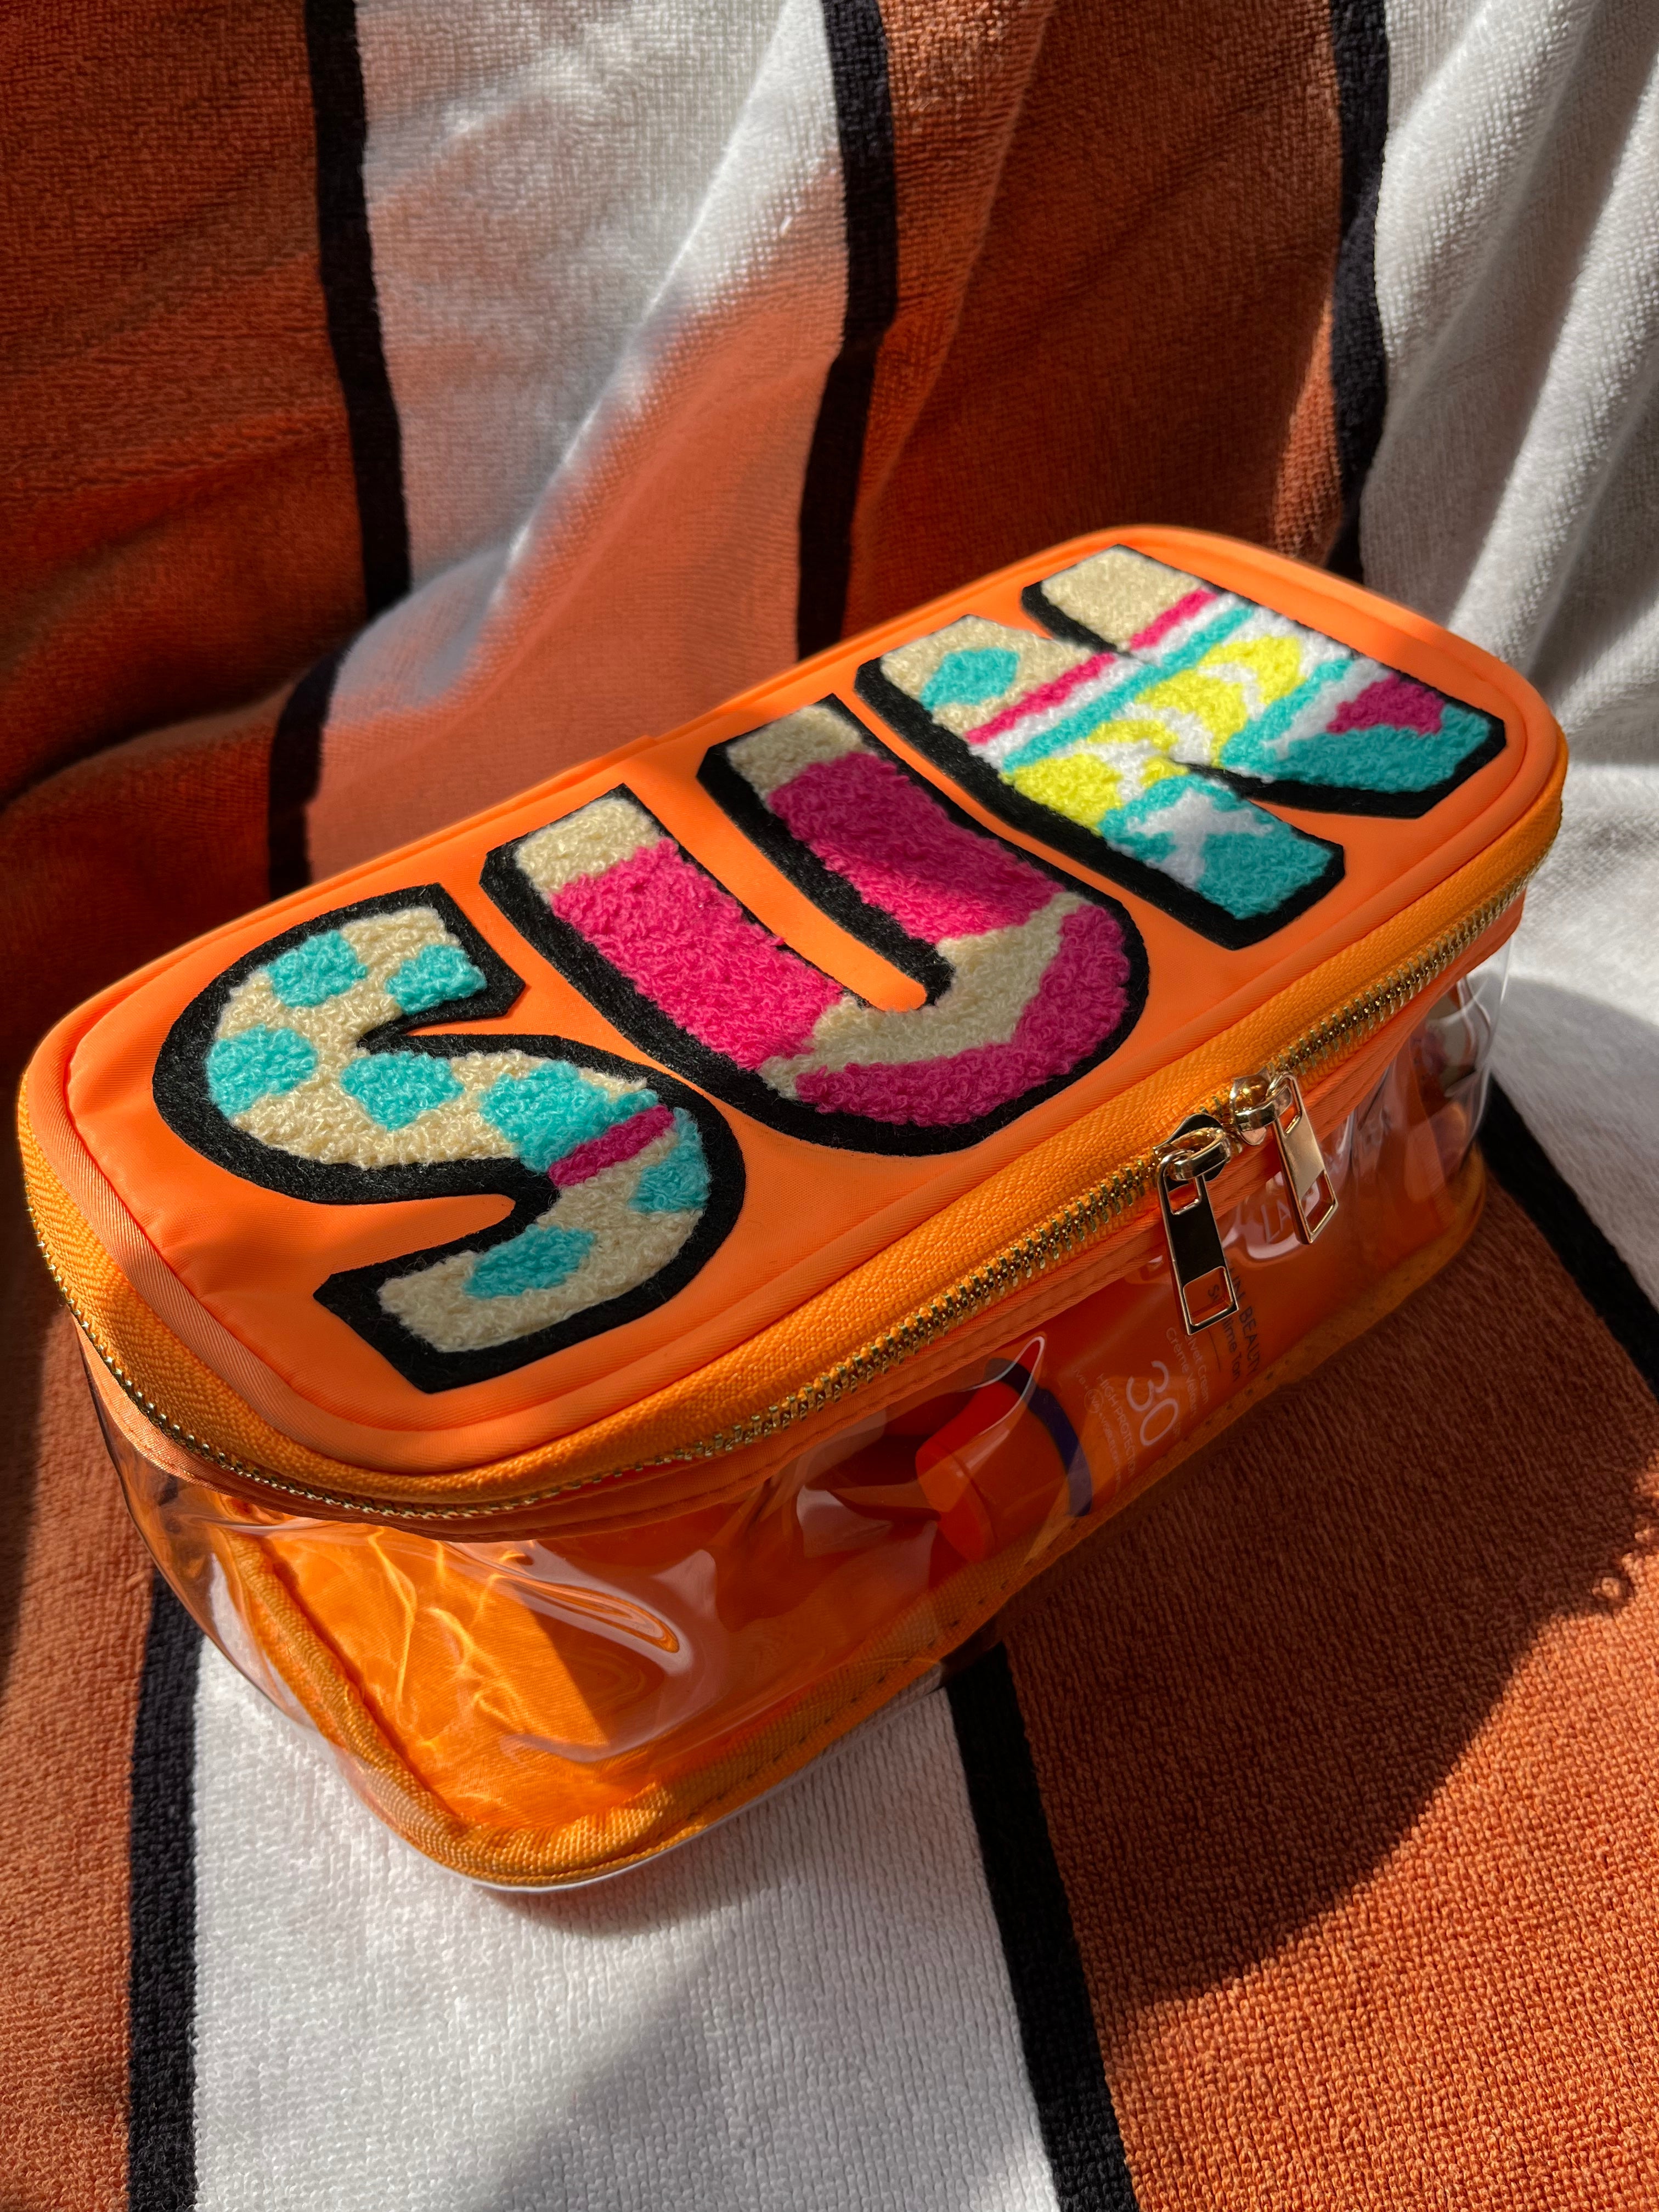 Personalised cosmetic case